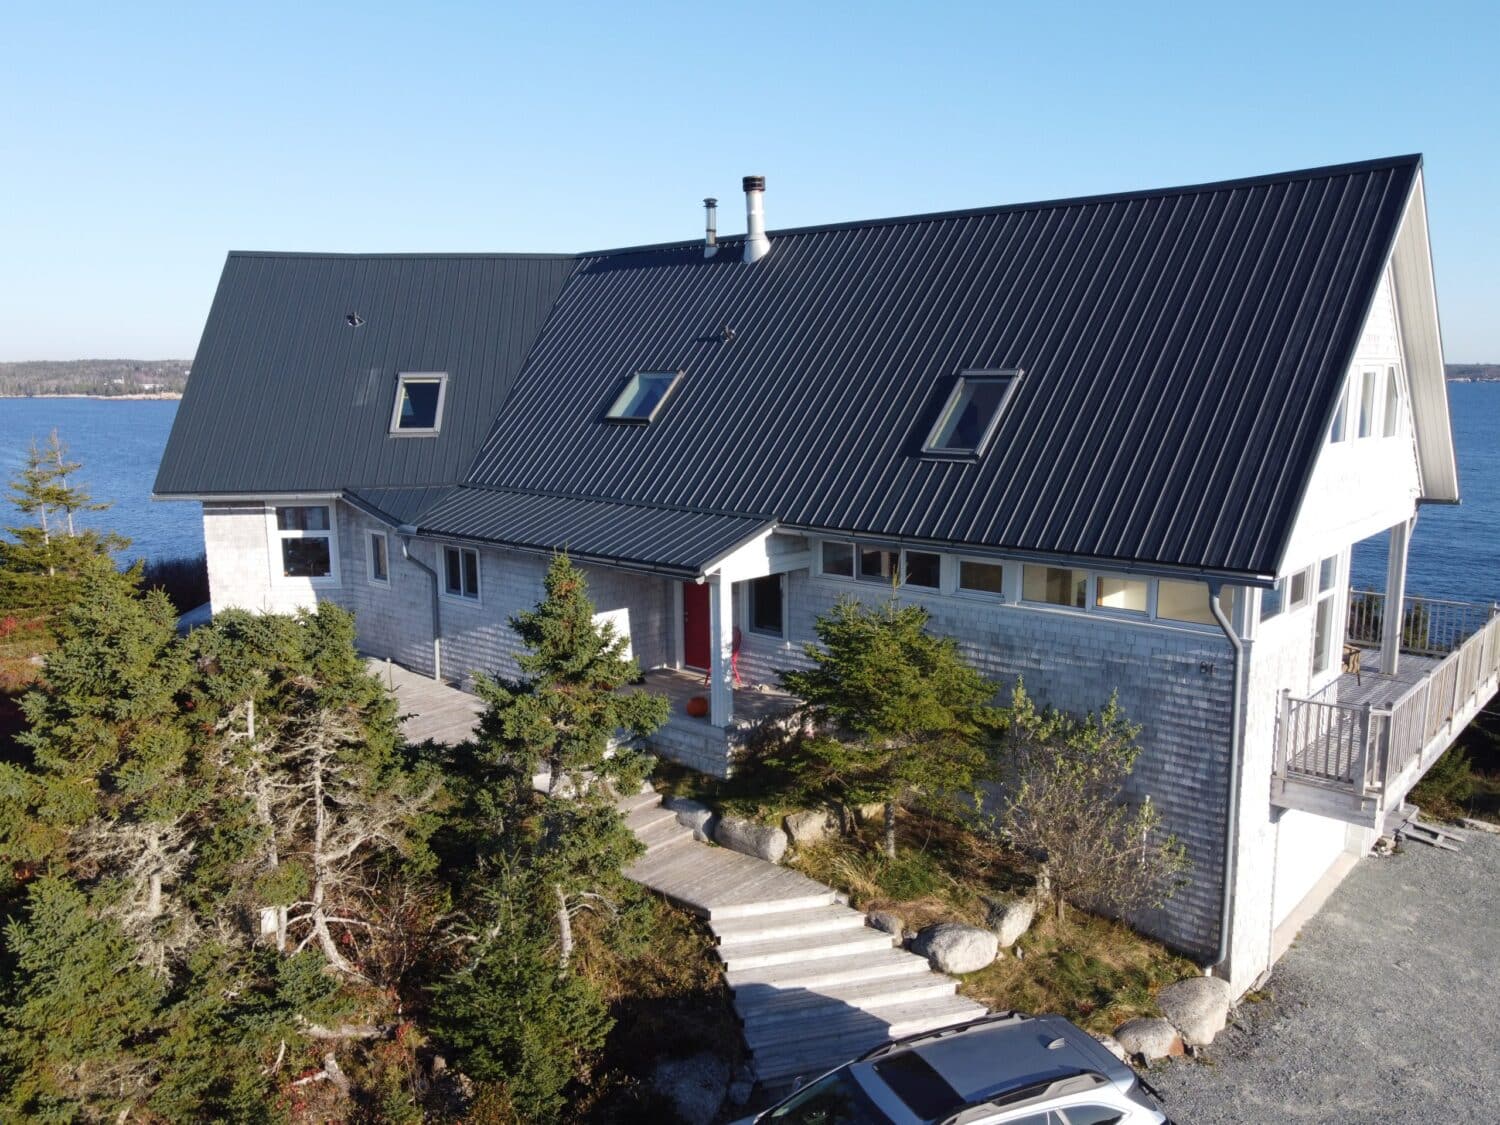 Residental home in halifax with metal roofing.